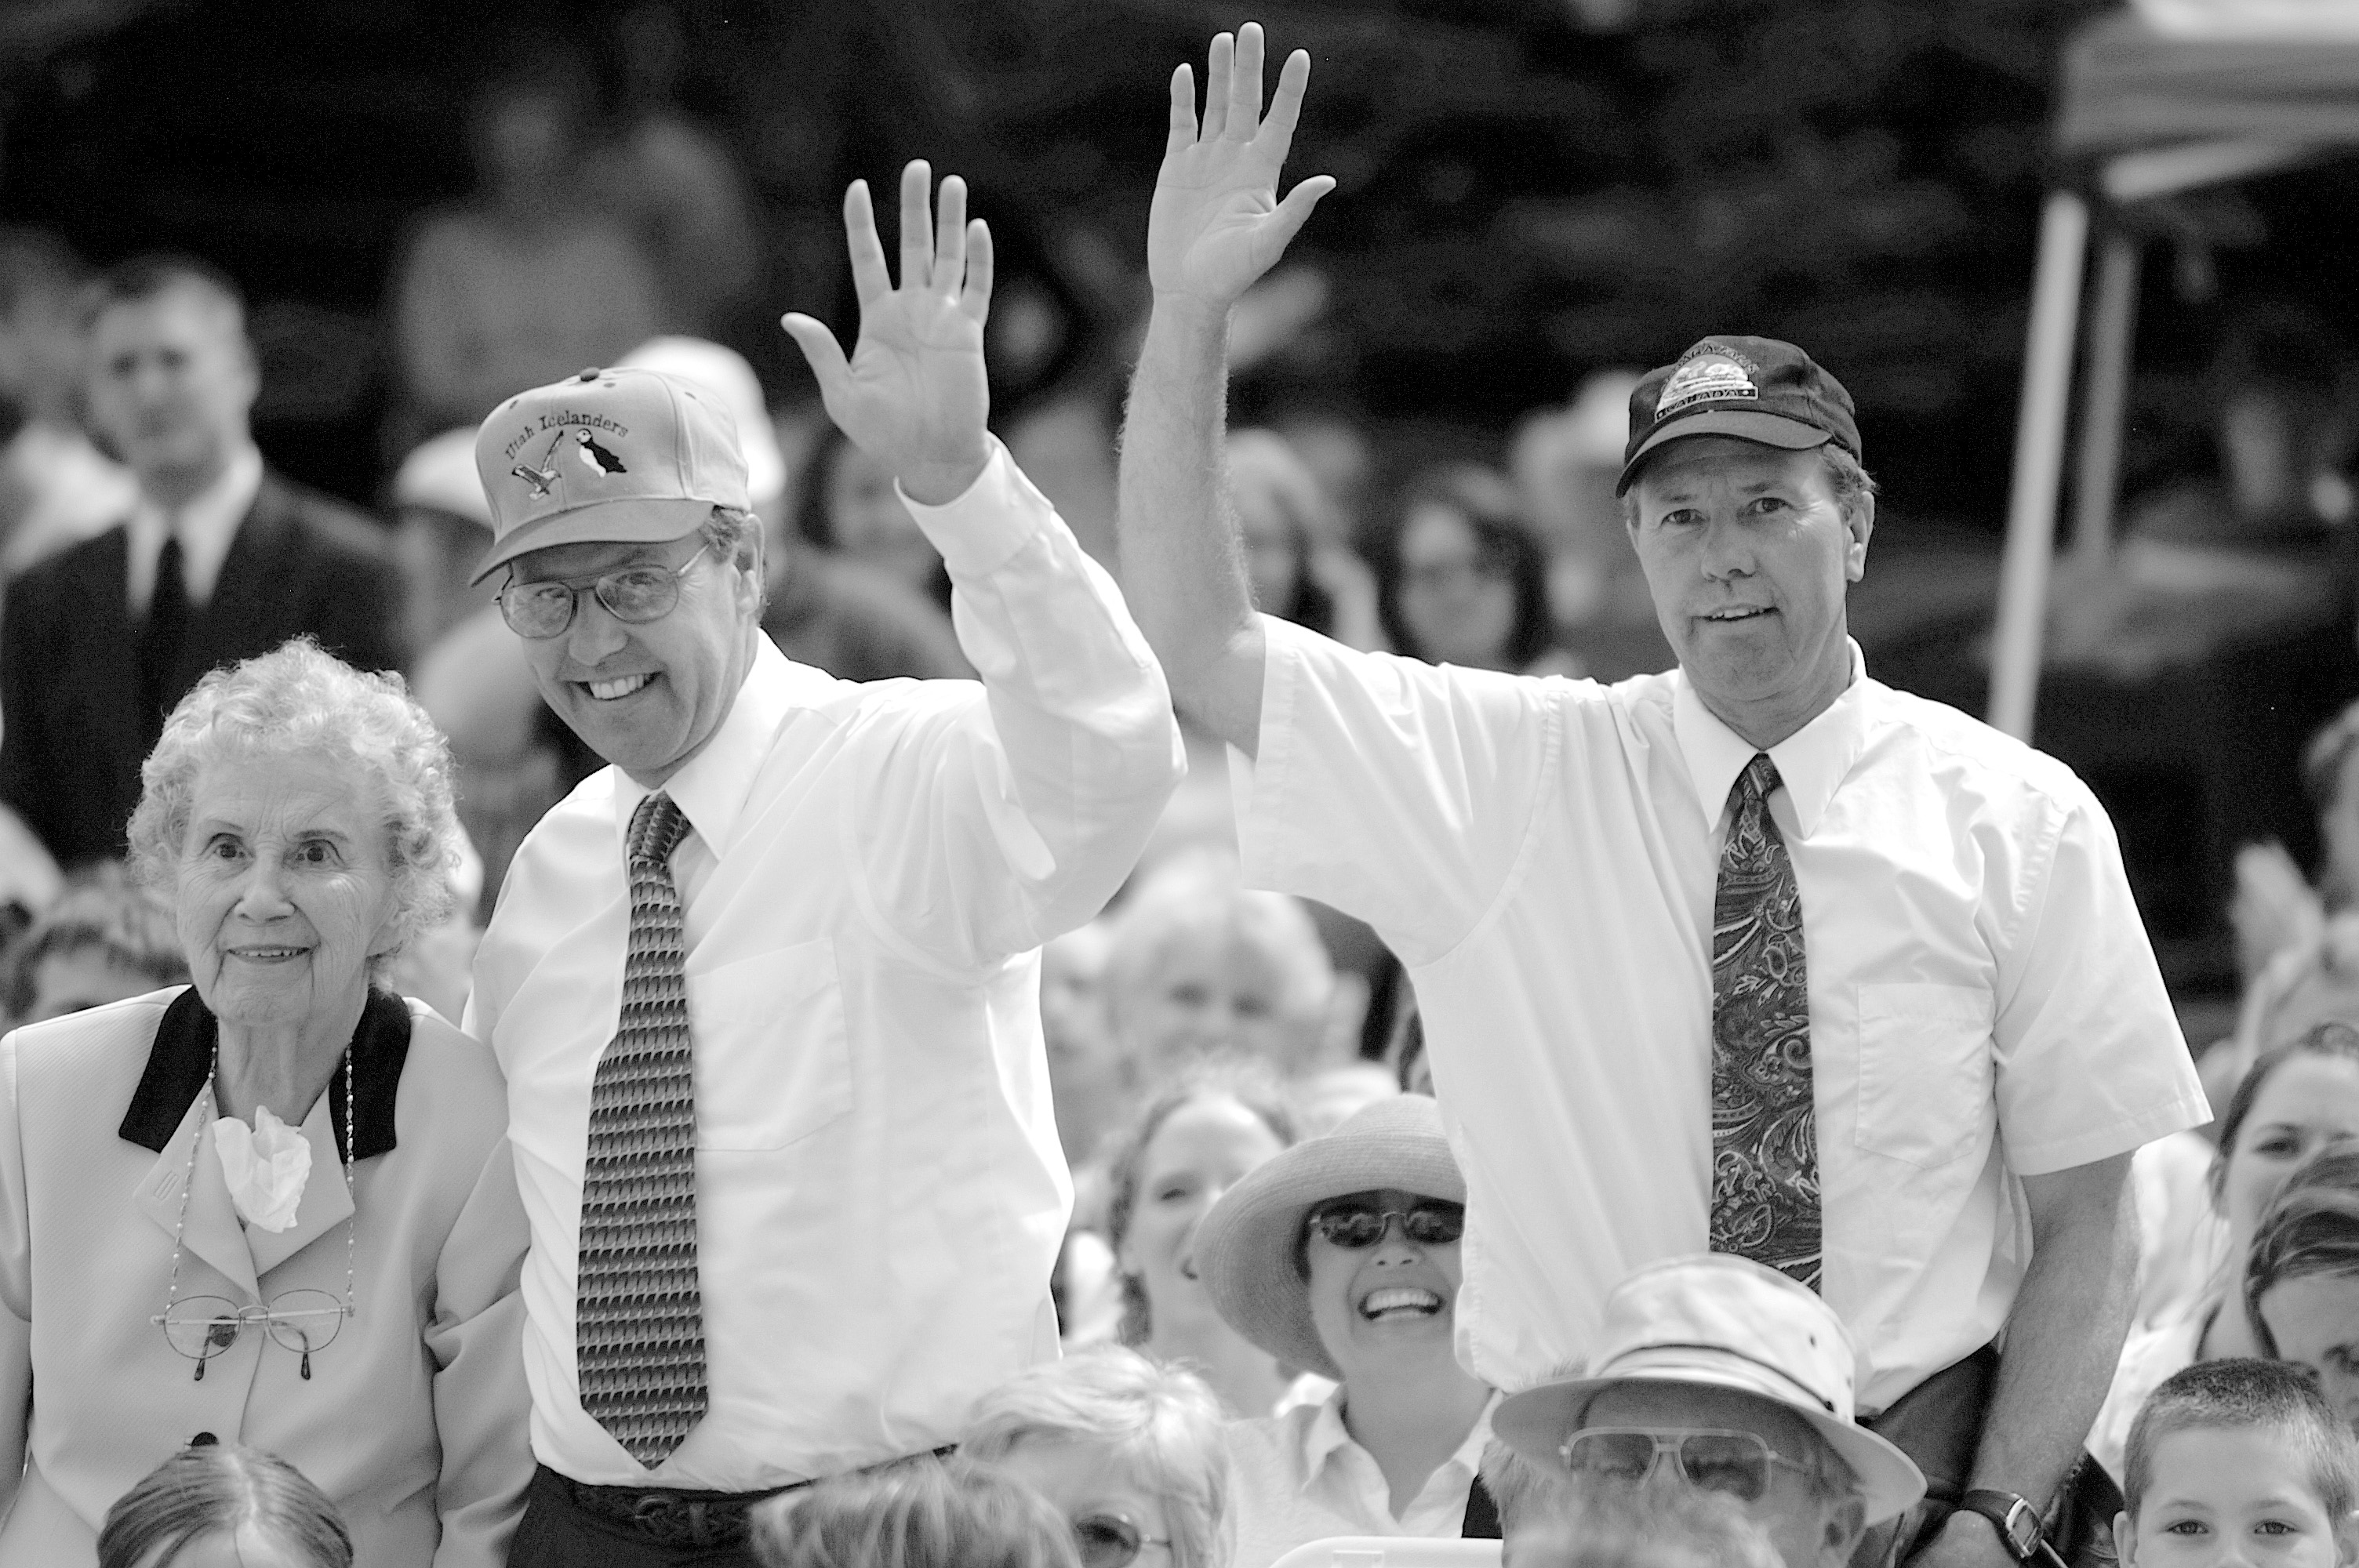 Melva, Daniel, and David Geslison (left to right) standing at the sesquicentennial commemoration when President Hinckley asked if the Geslison family were in the crowd, 2005. Courtesy of Ethan Vincent